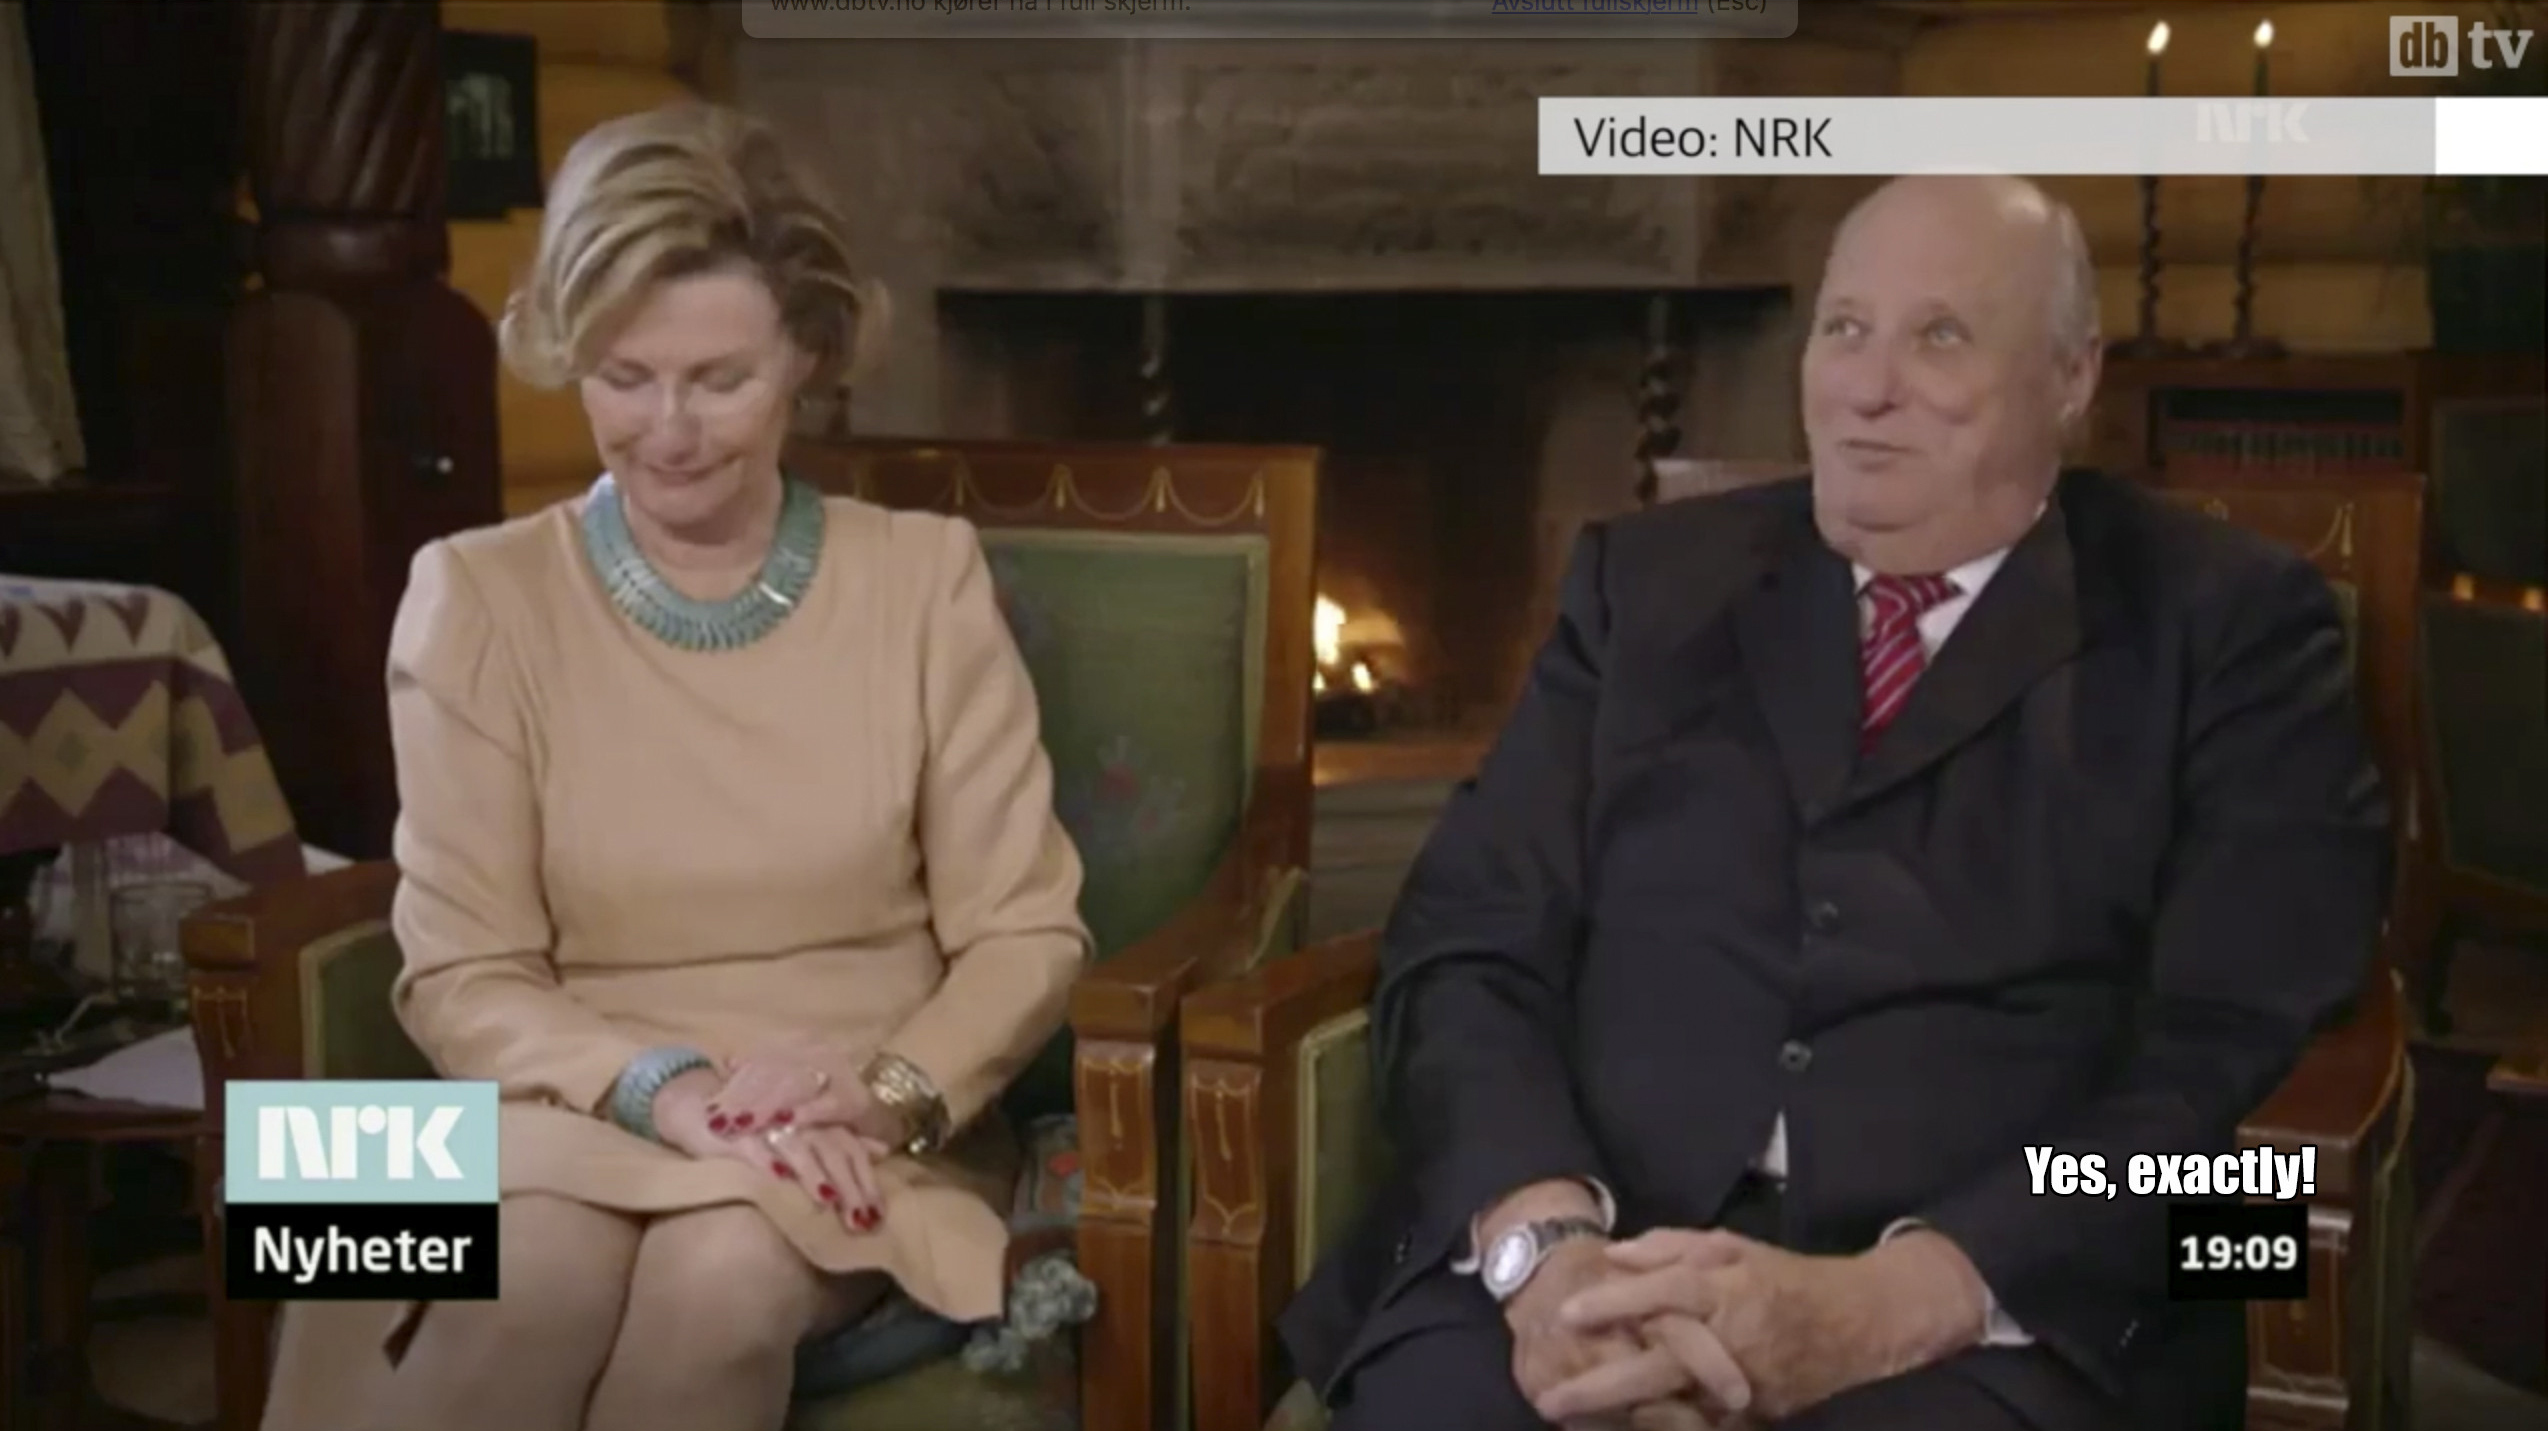 The King Of Norway Owns His Wife On TV